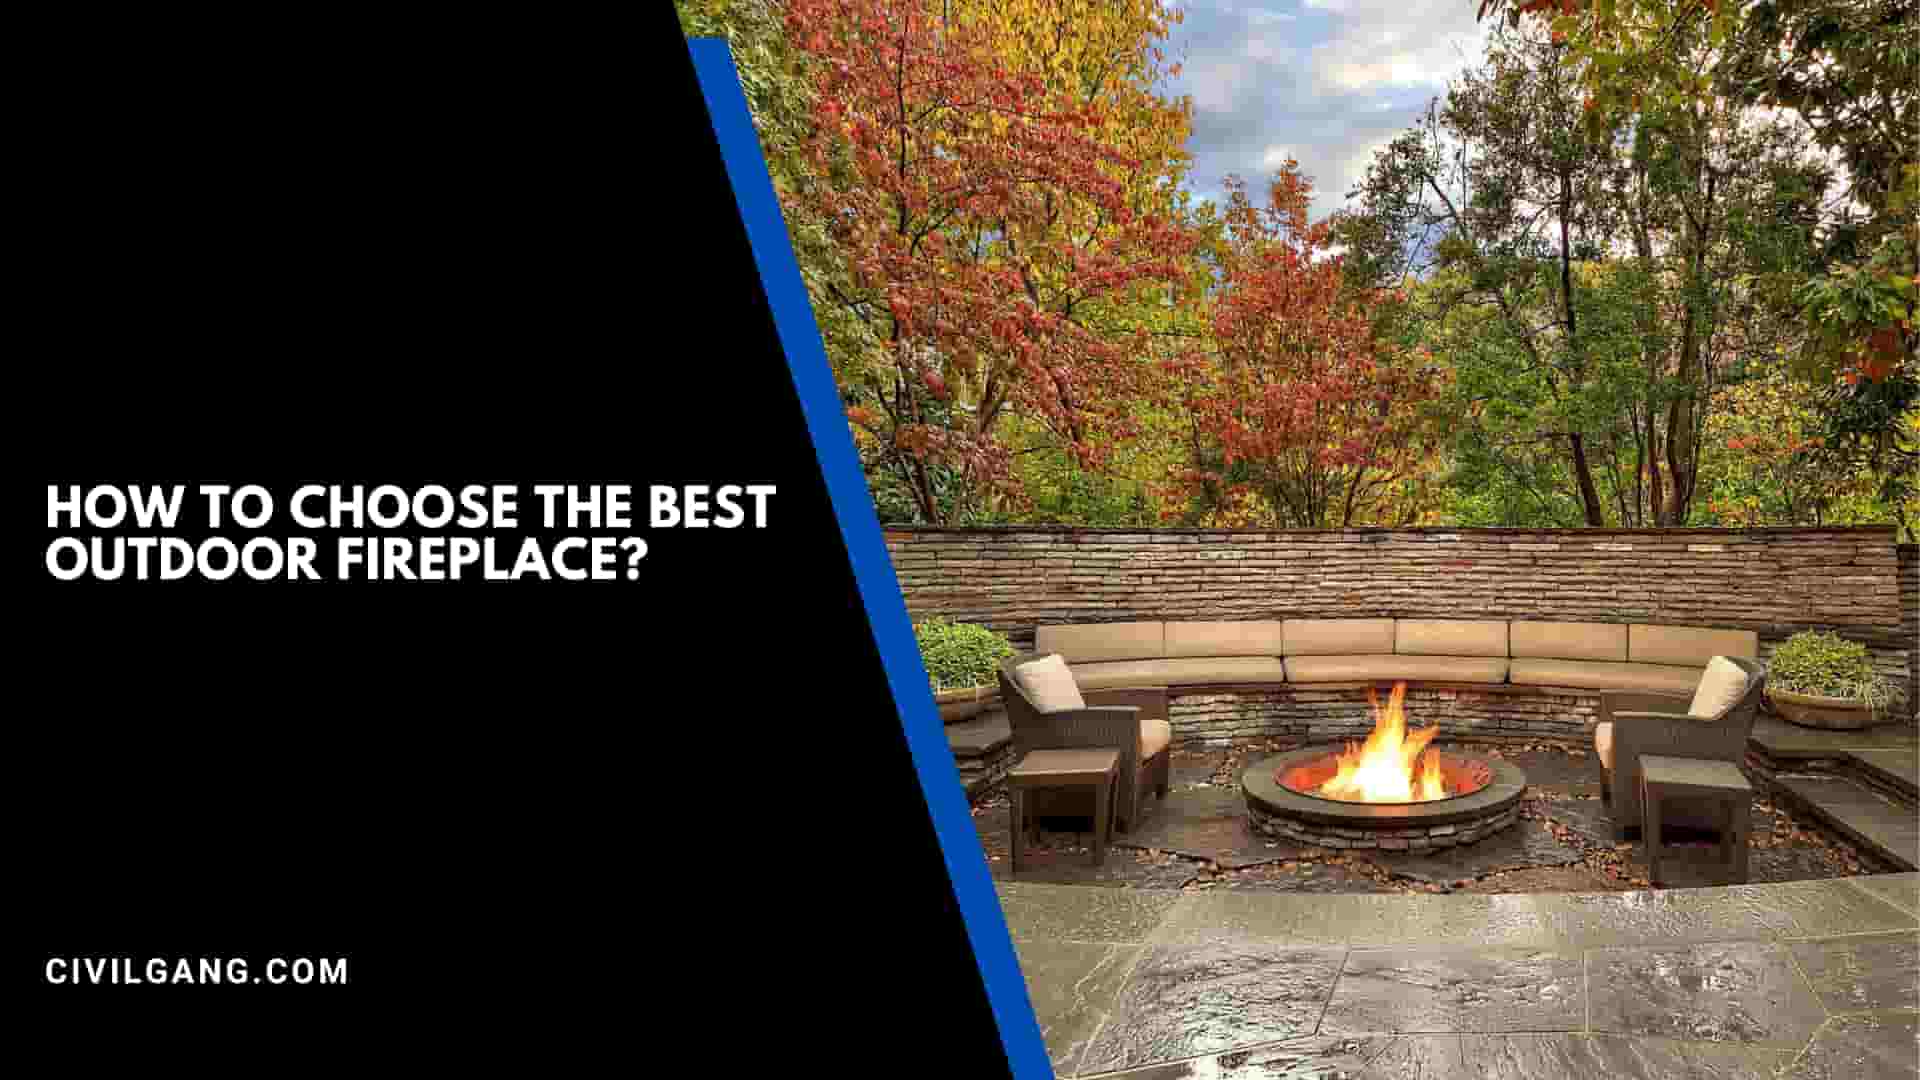 How to Choose the Best Outdoor Fireplace